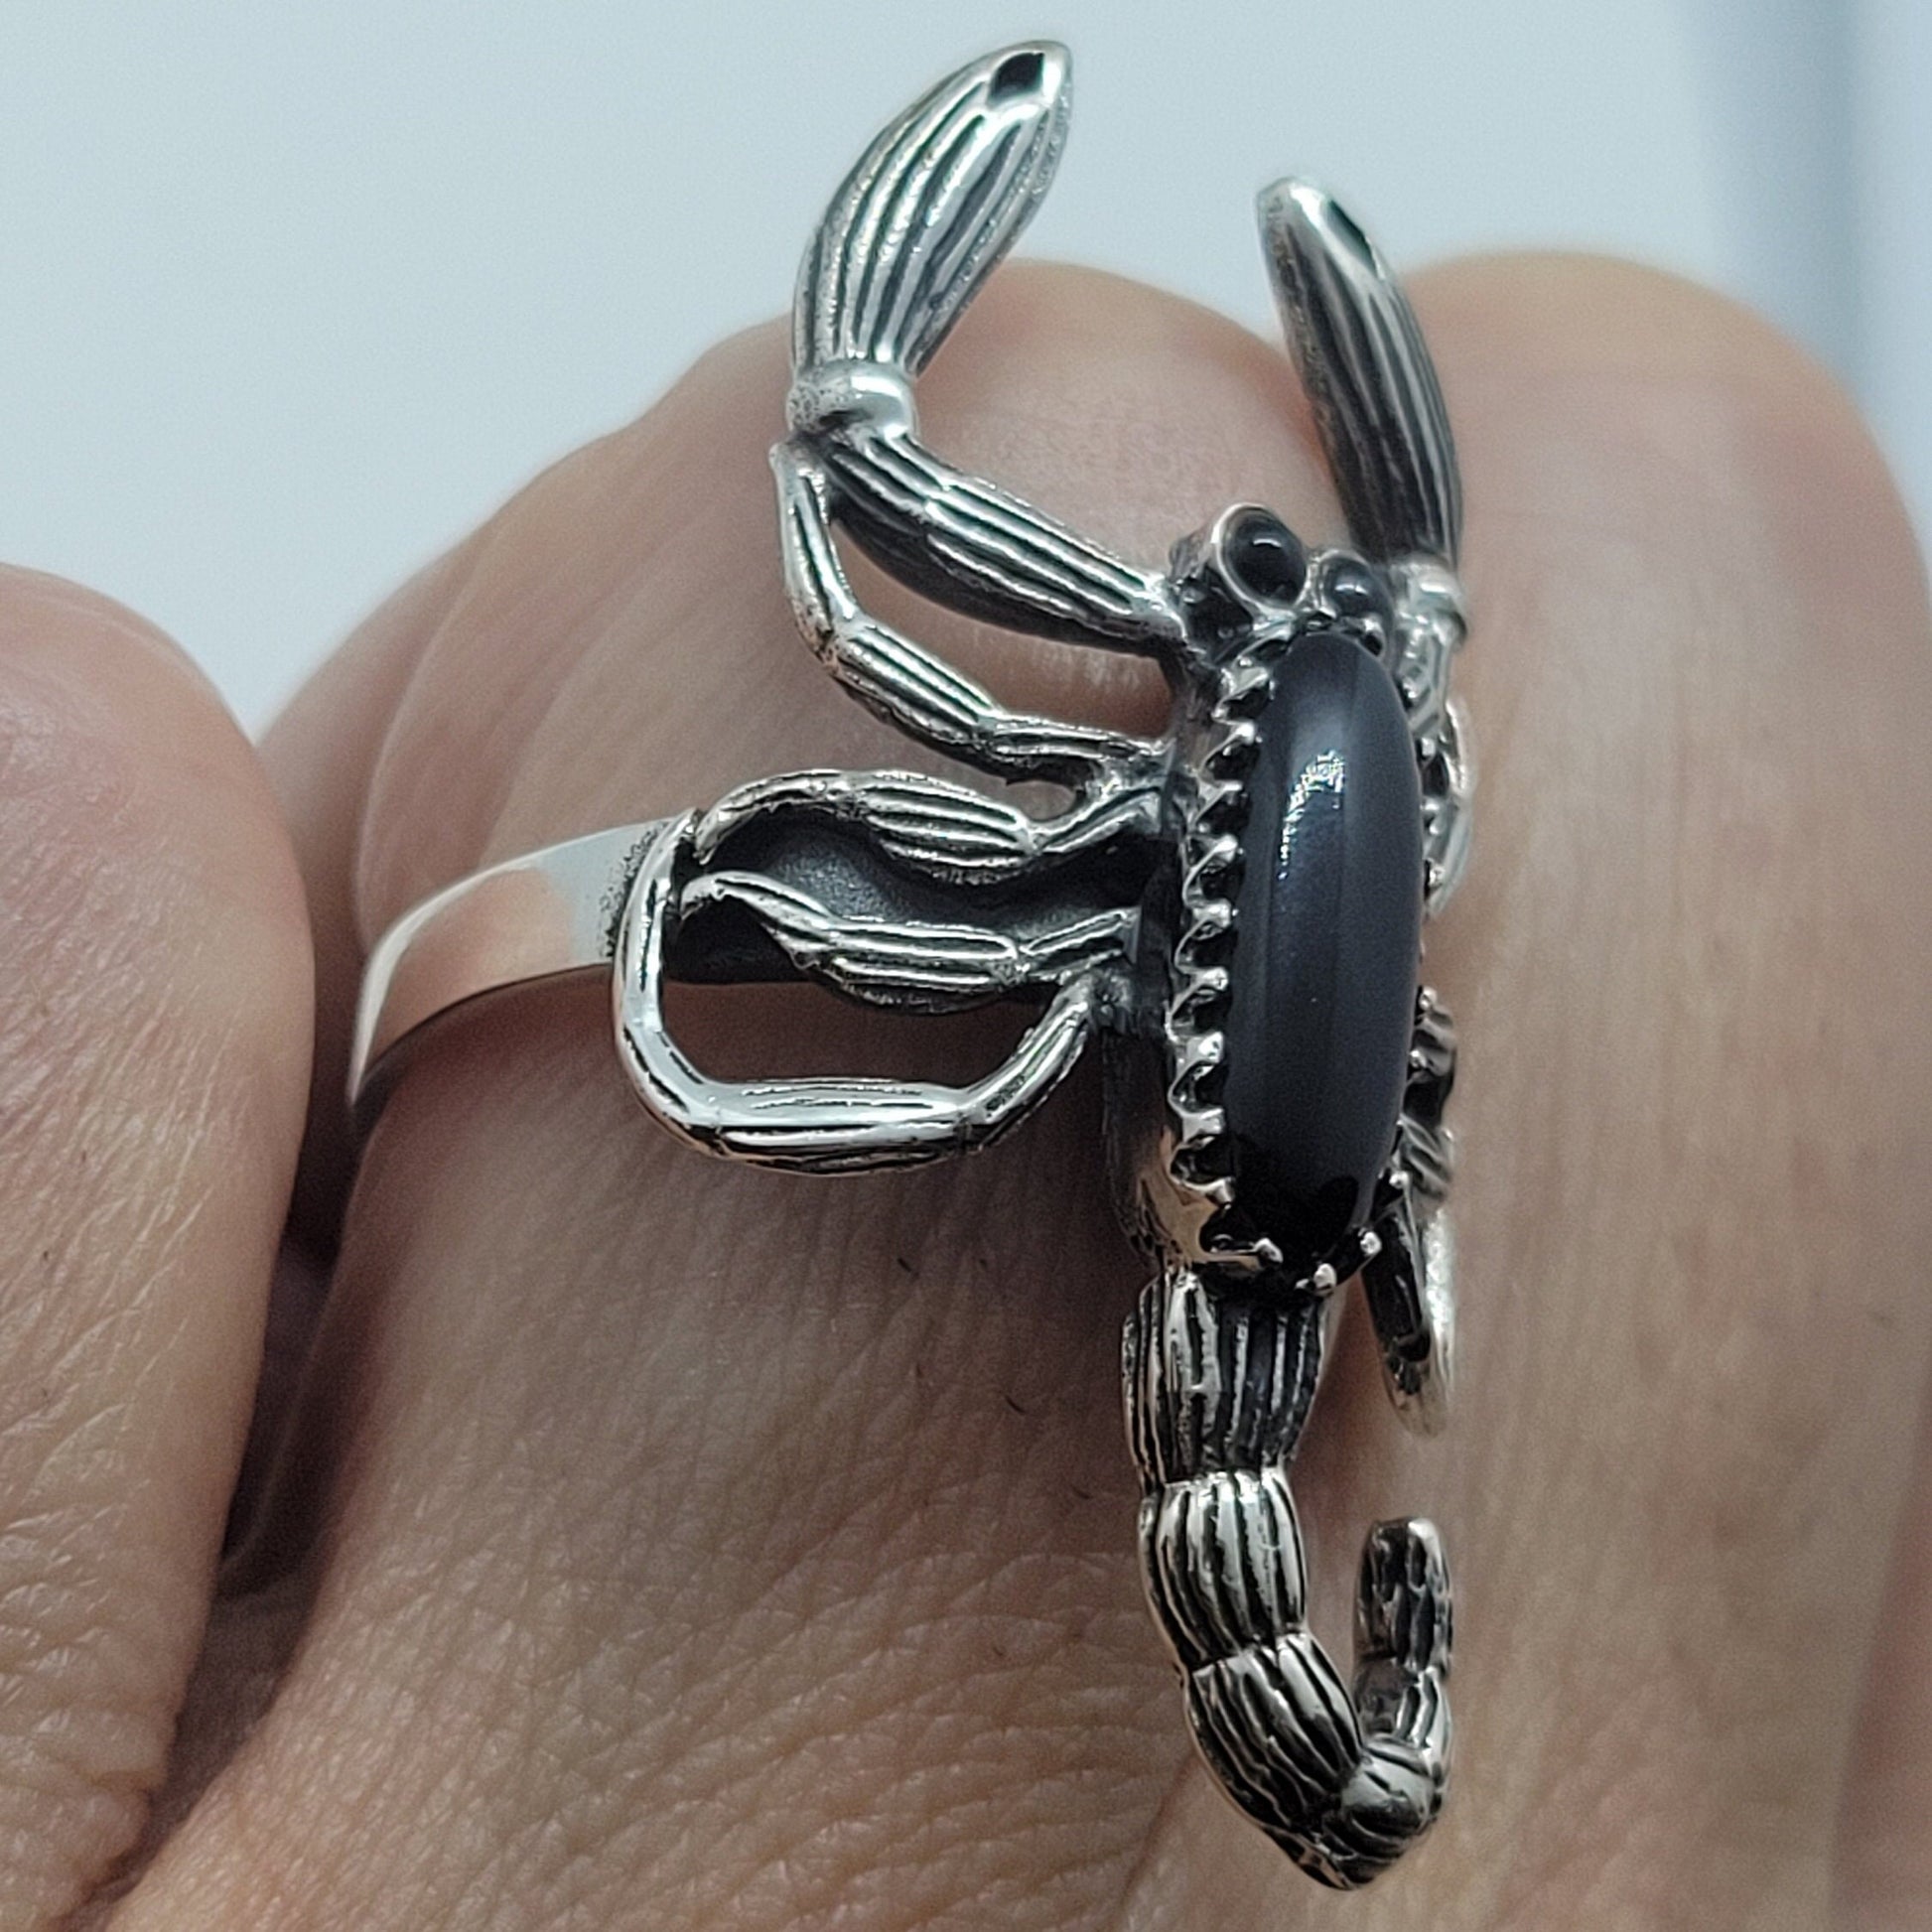 Vintage Black Onyx Scorpion Ring in 925 Sterling Silver with Genuine Onyx